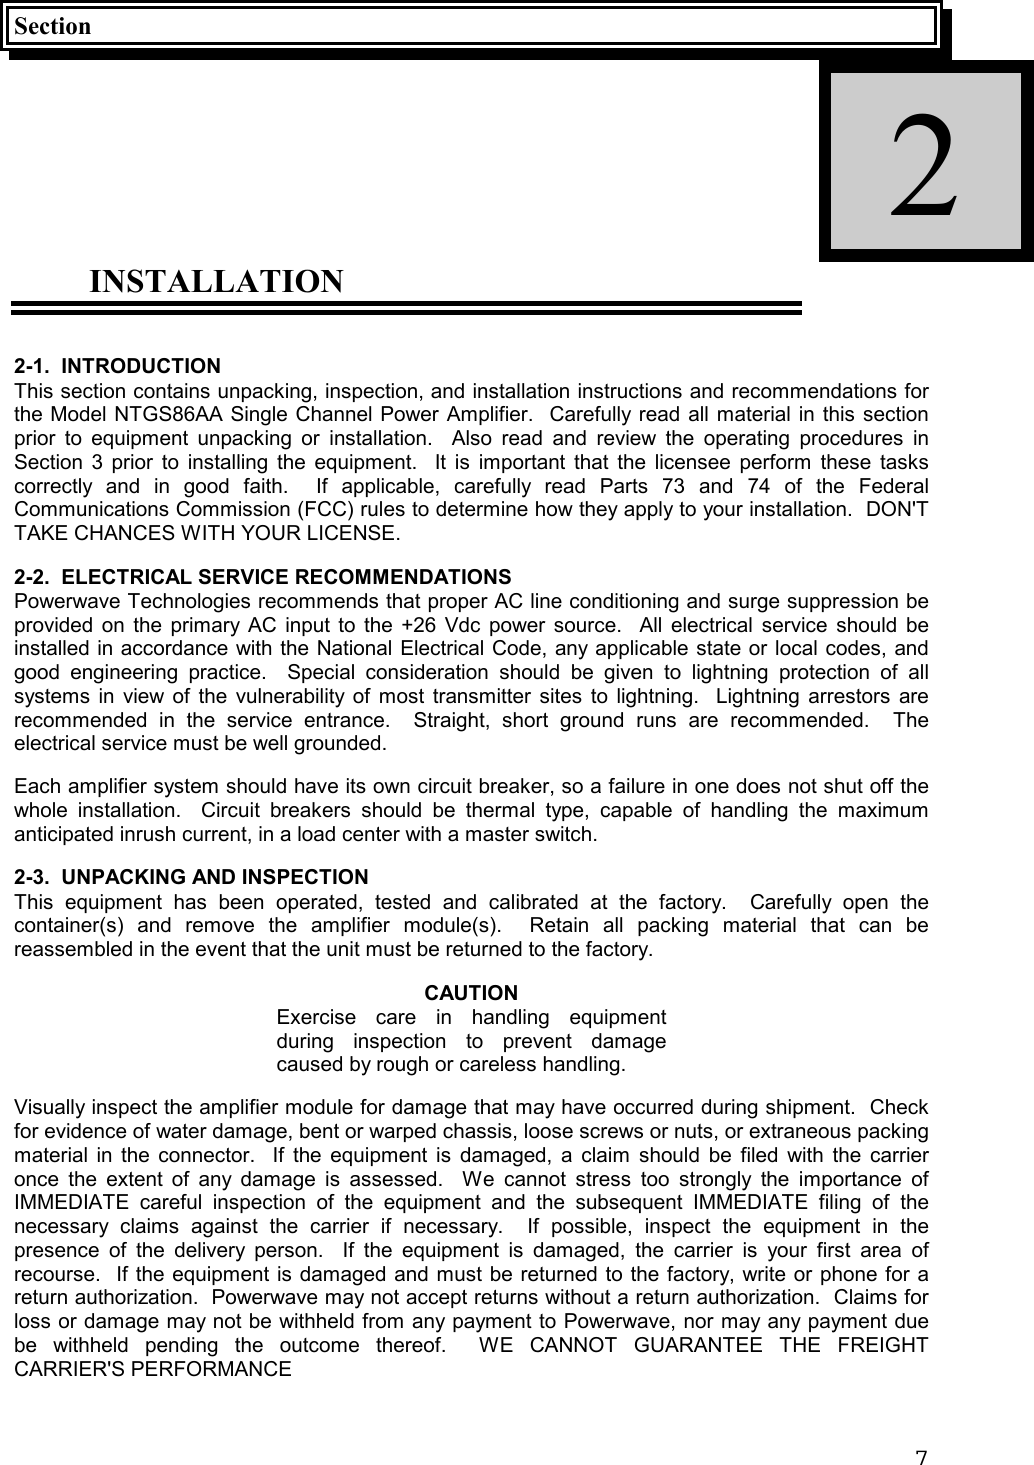 7SectionINSTALLATION2-1.  INTRODUCTIONThis section contains unpacking, inspection, and installation instructions and recommendations forthe Model NTGS86AA Single Channel Power Amplifier.  Carefully read all material in this sectionprior to equipment unpacking or installation.  Also read and review the operating procedures inSection 3 prior to installing the equipment.  It is important that the licensee perform these taskscorrectly and in good faith.  If applicable, carefully read Parts 73 and 74 of the FederalCommunications Commission (FCC) rules to determine how they apply to your installation.  DON&apos;TTAKE CHANCES WITH YOUR LICENSE.2-2.  ELECTRICAL SERVICE RECOMMENDATIONSPowerwave Technologies recommends that proper AC line conditioning and surge suppression beprovided on the primary AC input to the +26 Vdc power source.  All electrical service should beinstalled in accordance with the National Electrical Code, any applicable state or local codes, andgood engineering practice.  Special consideration should be given to lightning protection of allsystems in view of the vulnerability of most transmitter sites to lightning.  Lightning arrestors arerecommended in the service entrance.  Straight, short ground runs are recommended.  Theelectrical service must be well grounded.Each amplifier system should have its own circuit breaker, so a failure in one does not shut off thewhole installation.  Circuit breakers should be thermal type, capable of handling the maximumanticipated inrush current, in a load center with a master switch.2-3.  UNPACKING AND INSPECTIONThis equipment has been operated, tested and calibrated at the factory.  Carefully open thecontainer(s) and remove the amplifier module(s).  Retain all packing material that can bereassembled in the event that the unit must be returned to the factory.CAUTIONExercise care in handling equipmentduring inspection to prevent damagecaused by rough or careless handling.Visually inspect the amplifier module for damage that may have occurred during shipment.  Checkfor evidence of water damage, bent or warped chassis, loose screws or nuts, or extraneous packingmaterial in the connector.  If the equipment is damaged, a claim should be filed with the carrieronce the extent of any damage is assessed.  We cannot stress too strongly the importance ofIMMEDIATE careful inspection of the equipment and the subsequent IMMEDIATE filing of thenecessary claims against the carrier if necessary.  If possible, inspect the equipment in thepresence of the delivery person.  If the equipment is damaged, the carrier is your first area ofrecourse.  If the equipment is damaged and must be returned to the factory, write or phone for areturn authorization.  Powerwave may not accept returns without a return authorization.  Claims forloss or damage may not be withheld from any payment to Powerwave, nor may any payment duebe withheld pending the outcome thereof.  WE CANNOT GUARANTEE THE FREIGHTCARRIER&apos;S PERFORMANCE2